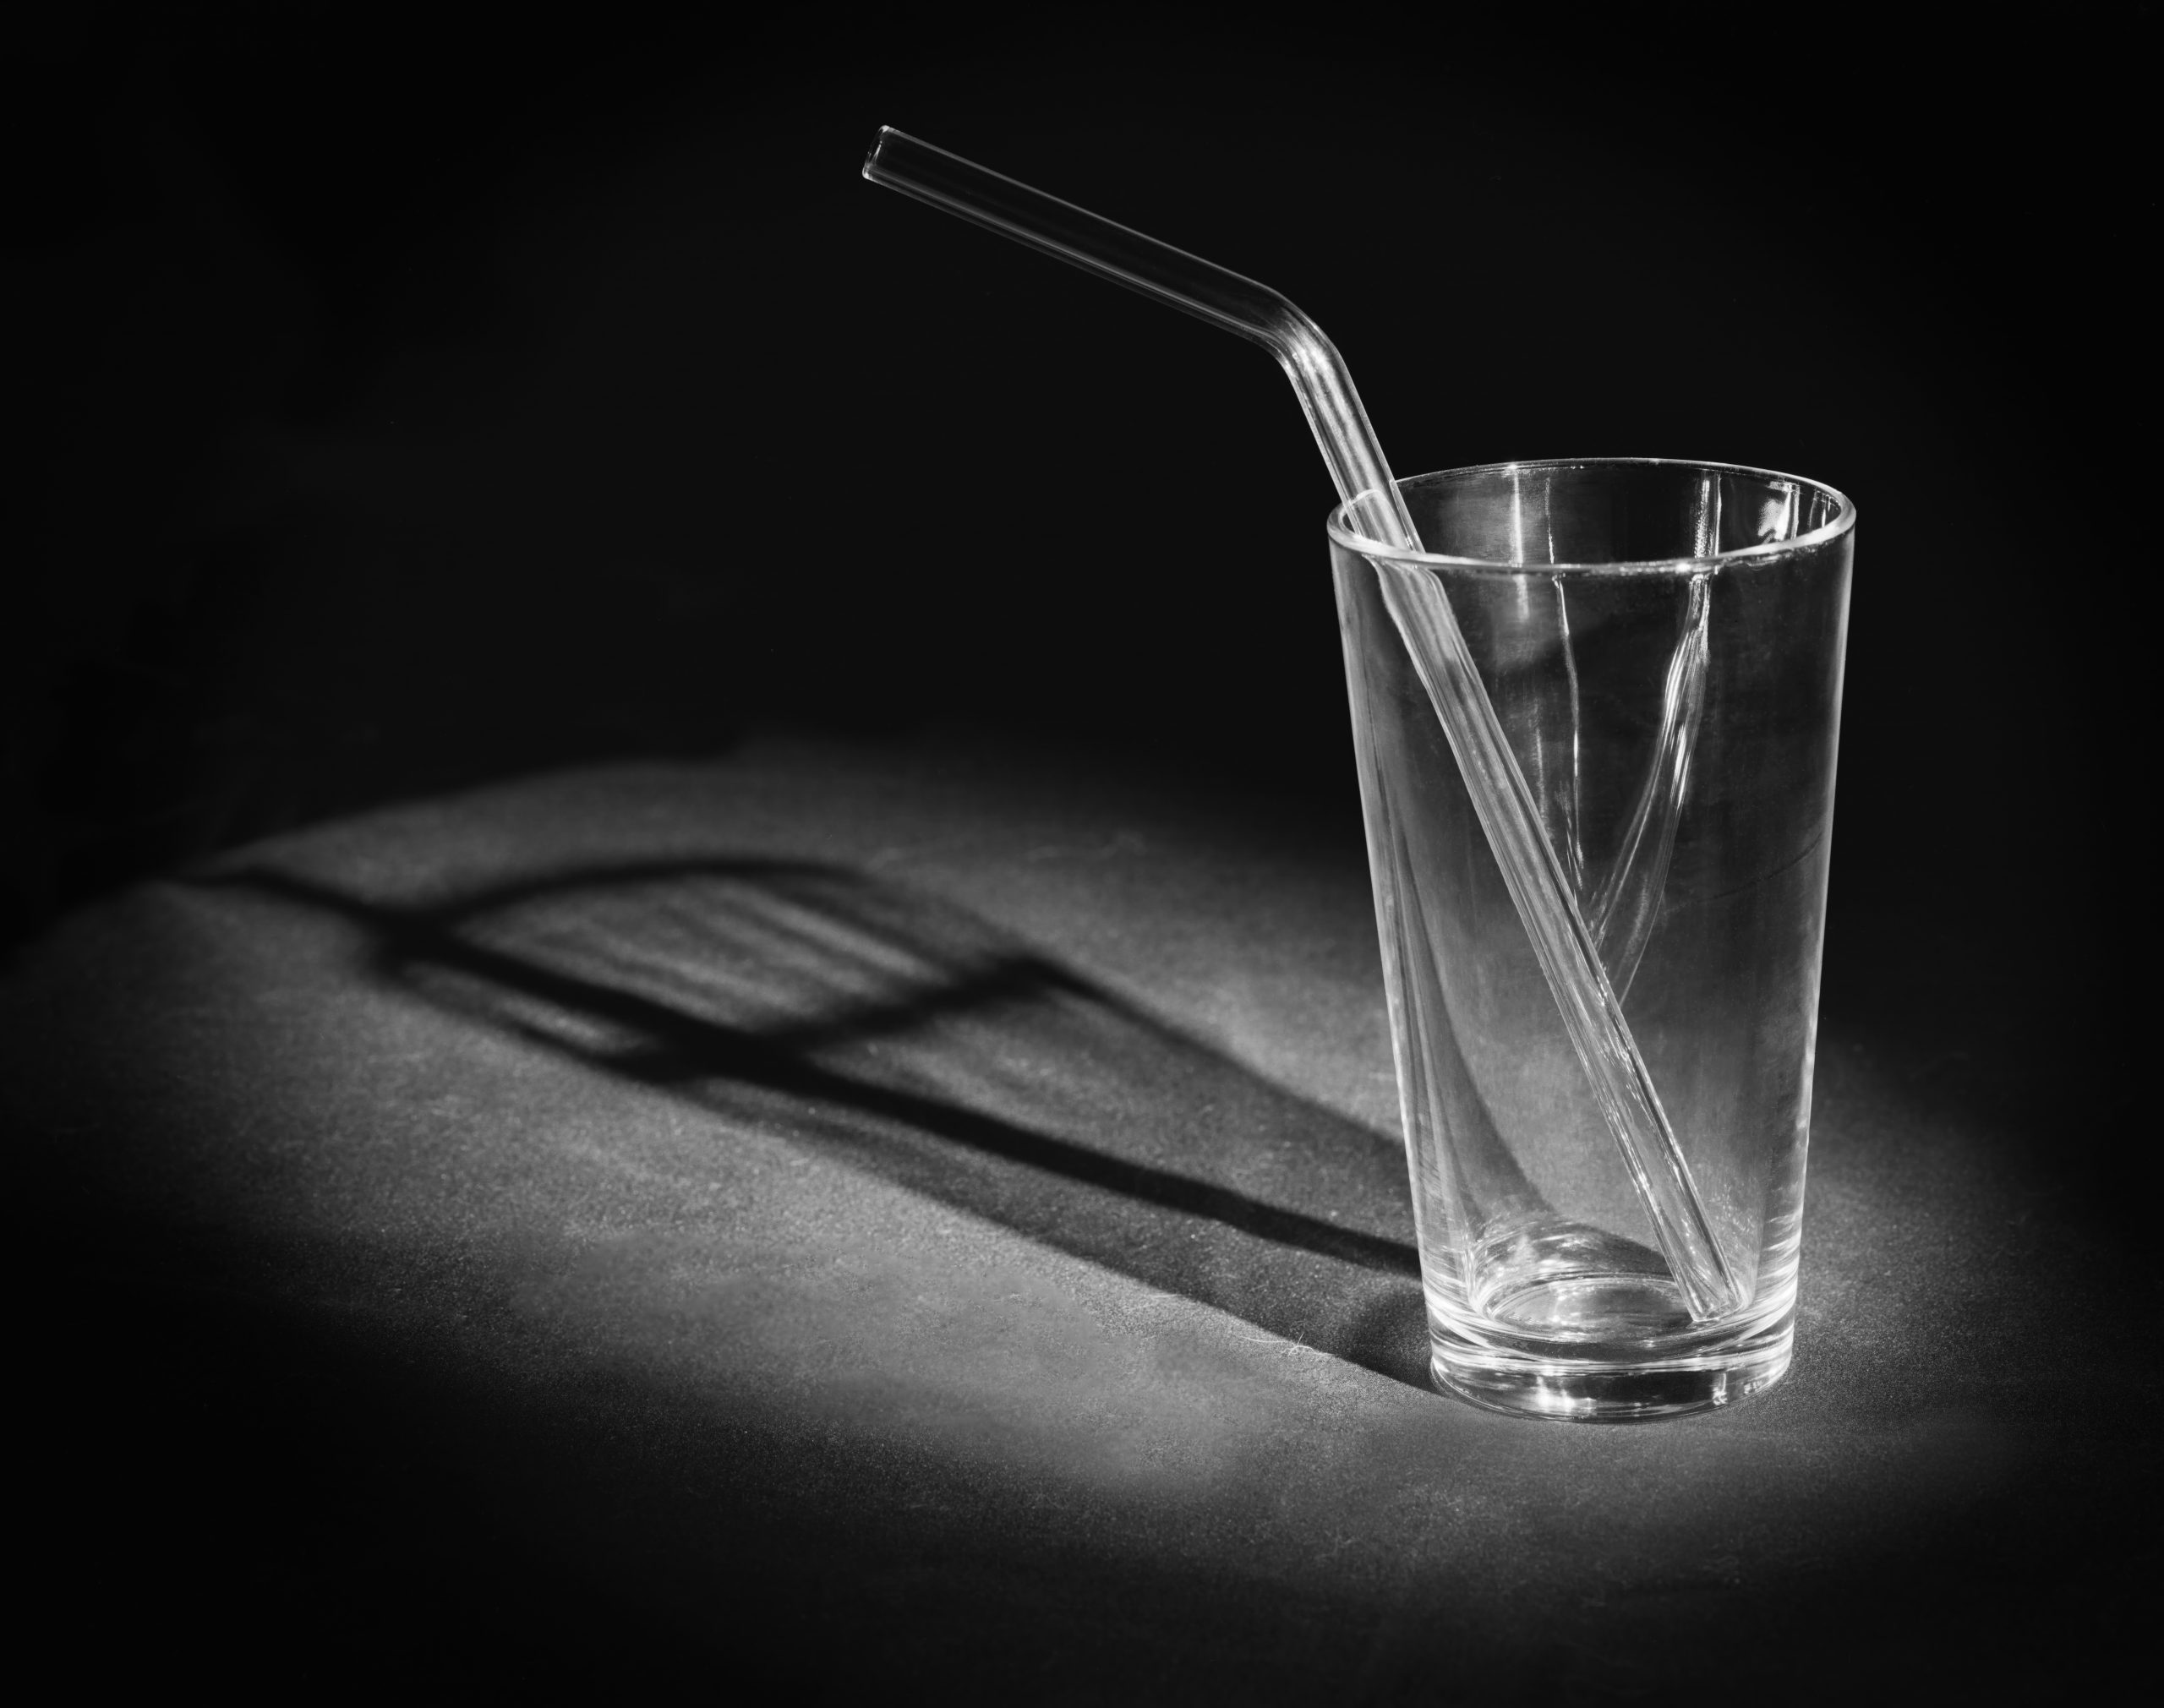 Studio capture of an empty glass and a glass straw with deep shadows. The emptiness of the glass is up to the interpretation of the viewer. Captured on 4 x 5 " B/W sheet film. Home processed